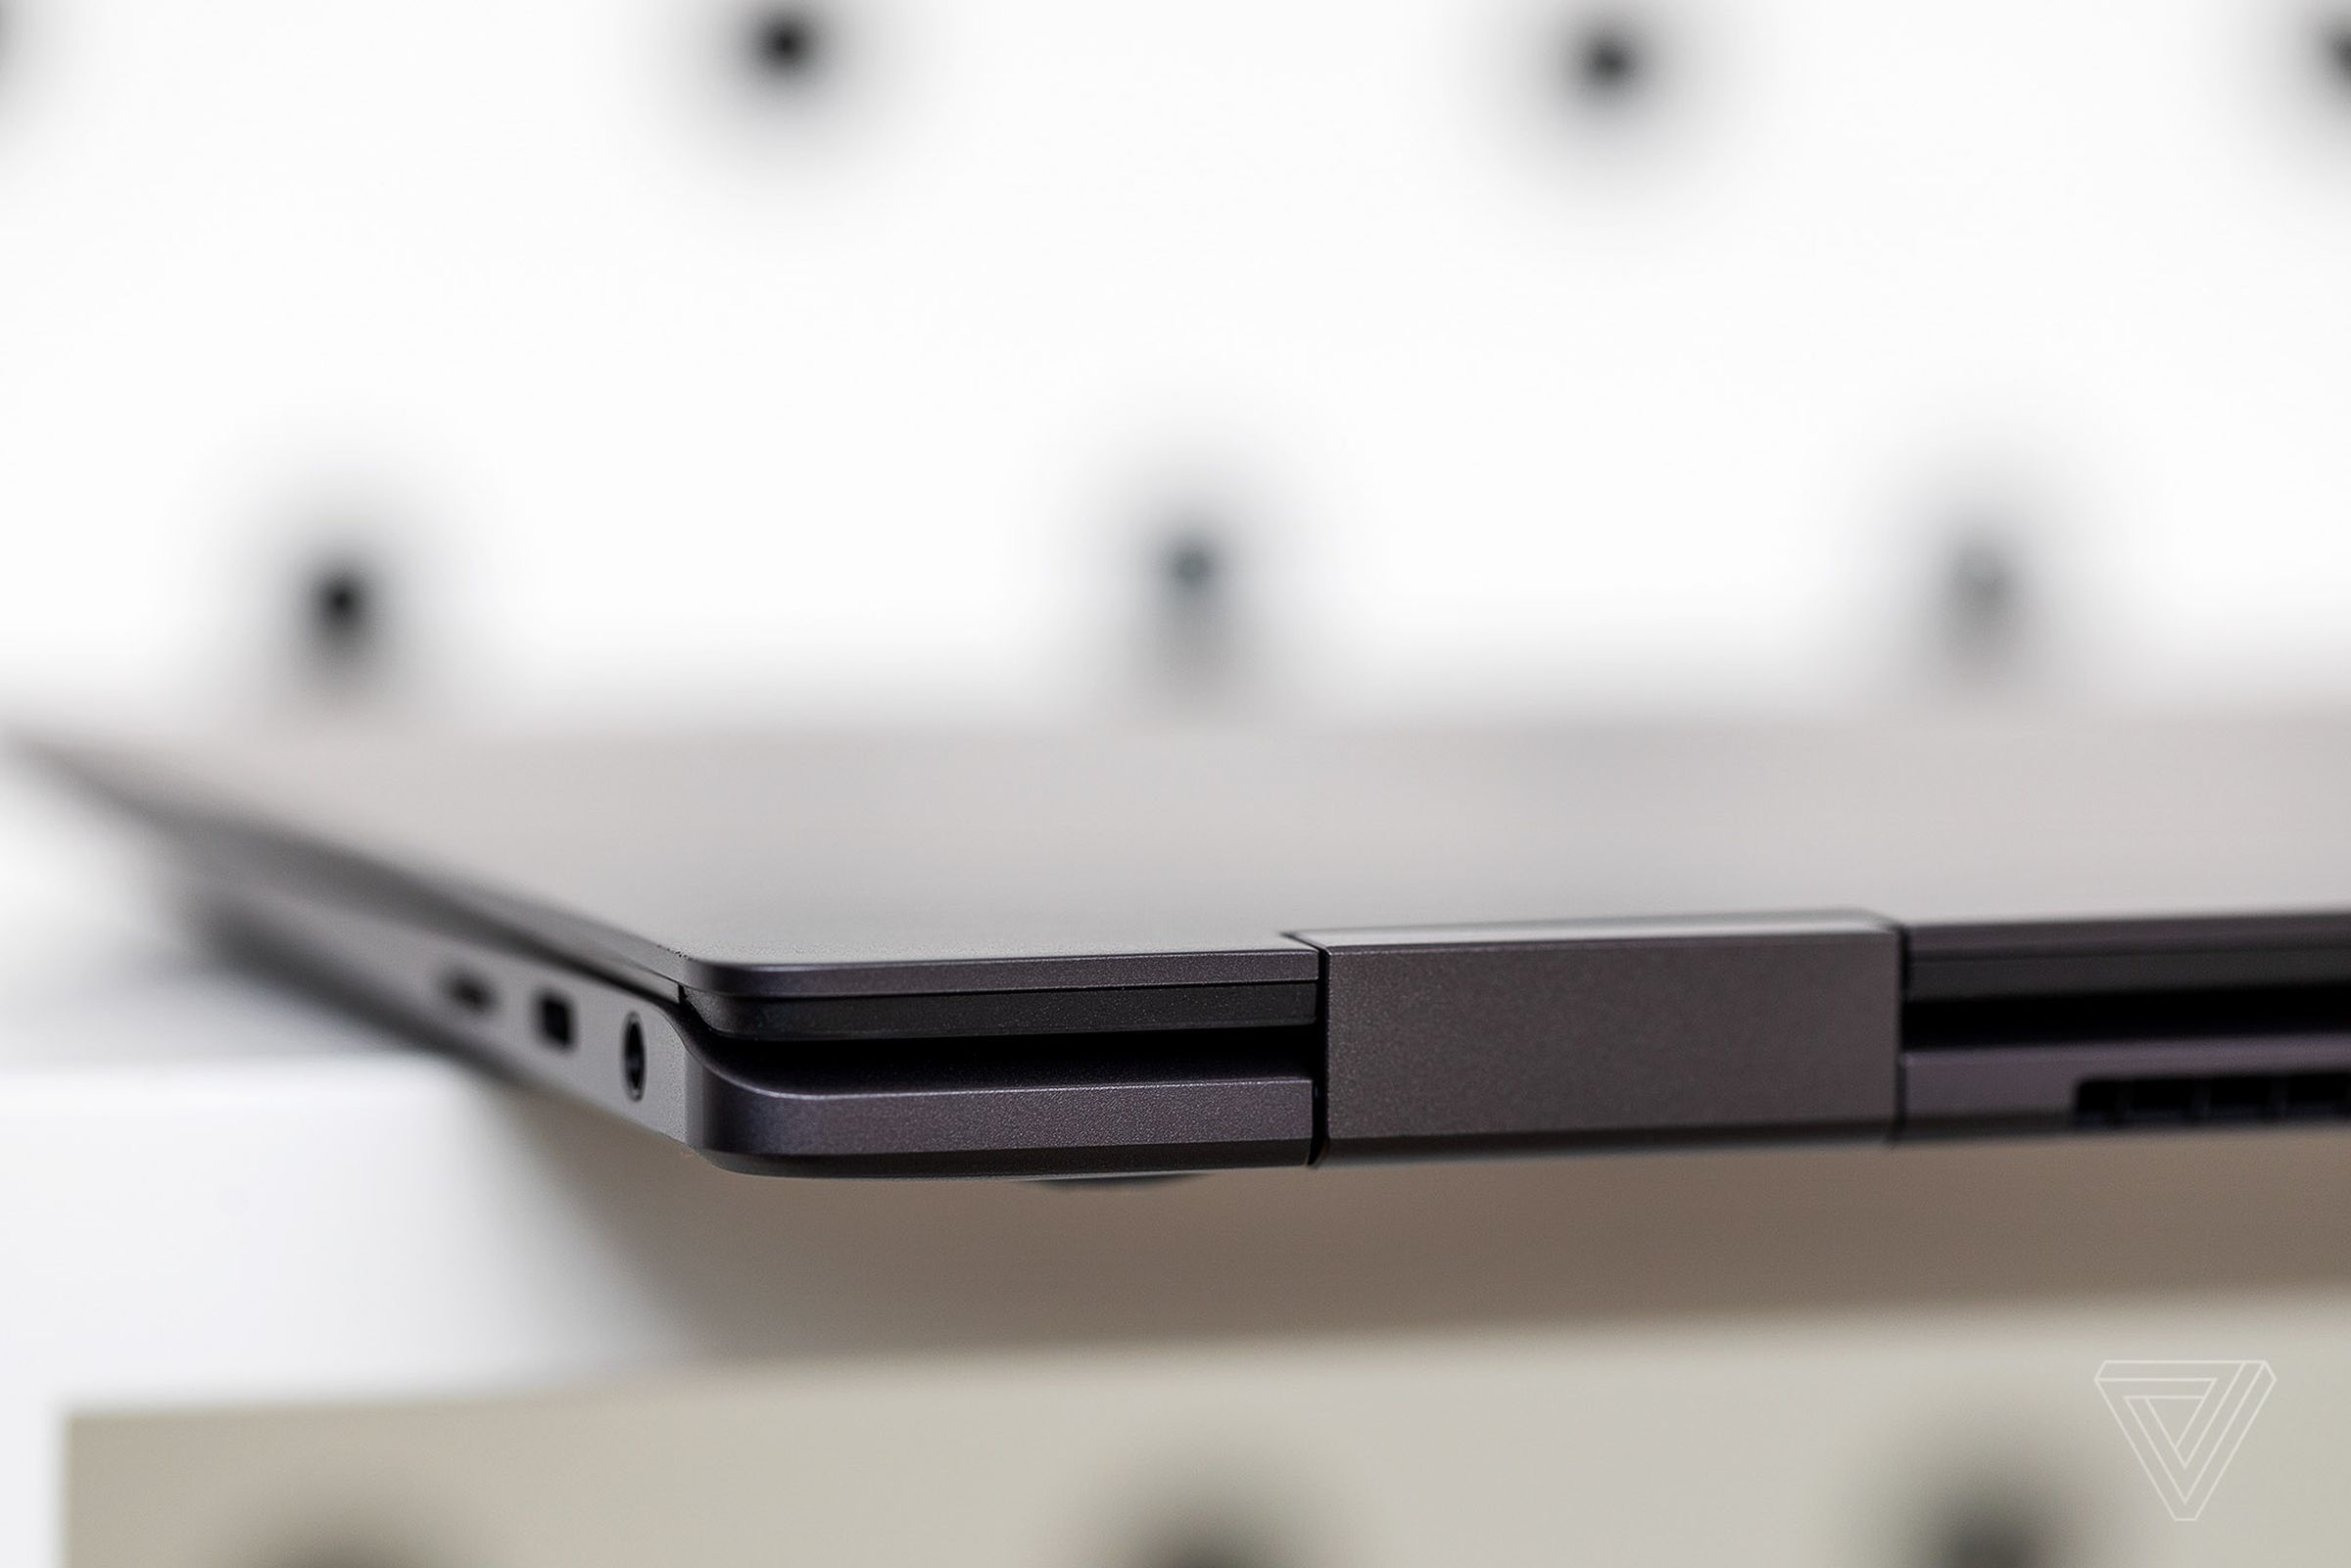 The back hinge of the Samsung Galaxy Book2 Pro 360